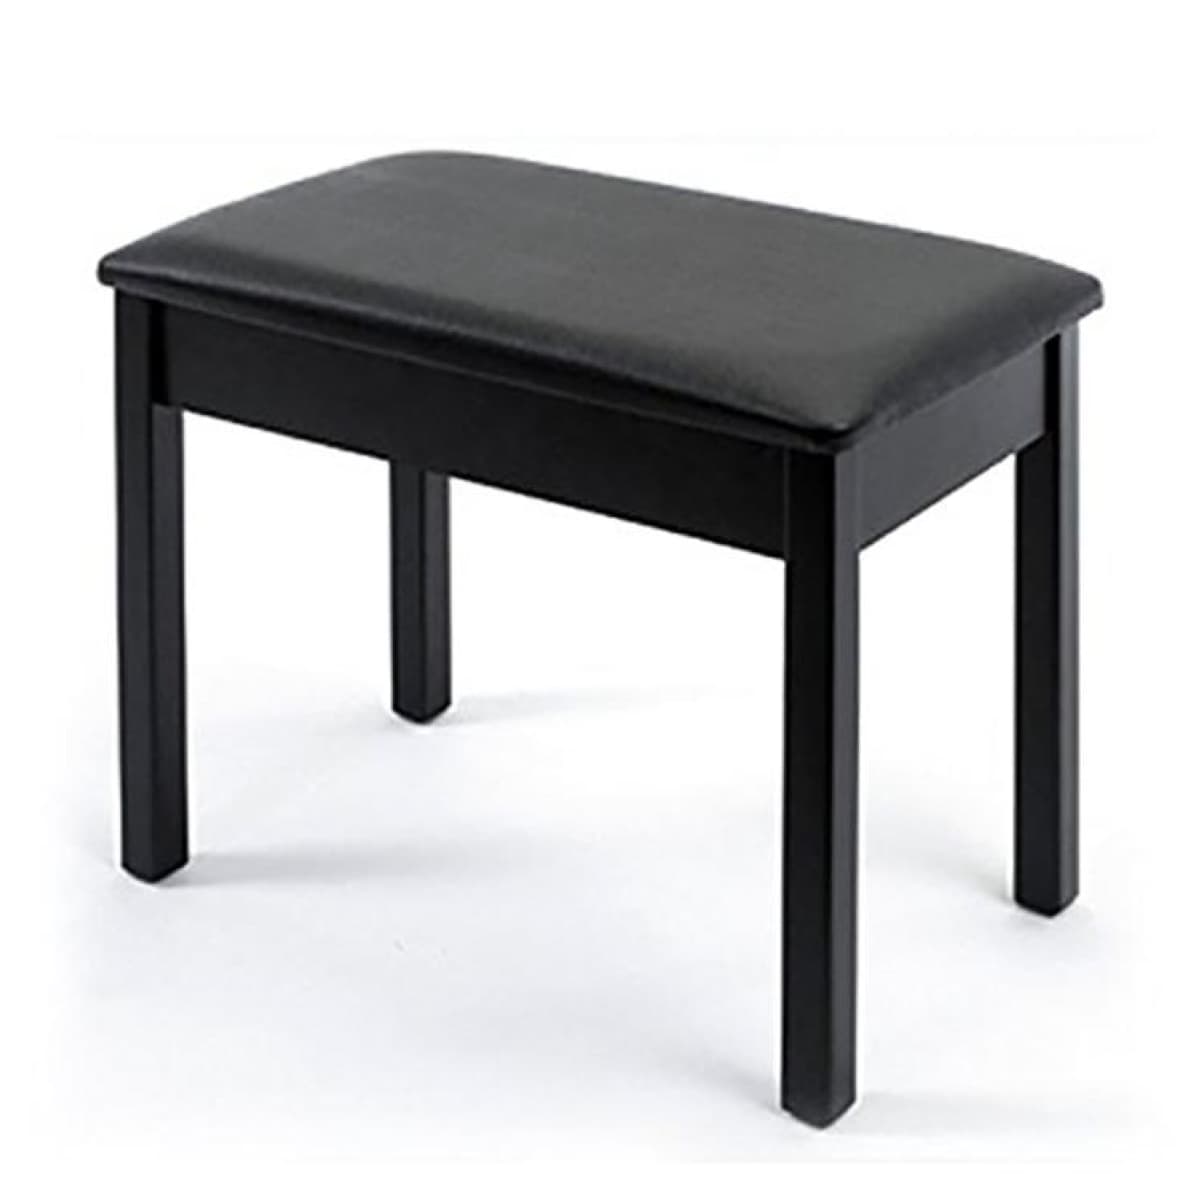 Shop online for Yamaha BB1 Black Piano Bench today. Now available for purchase from Midlothian Music of Orland Park, Illinois, USA